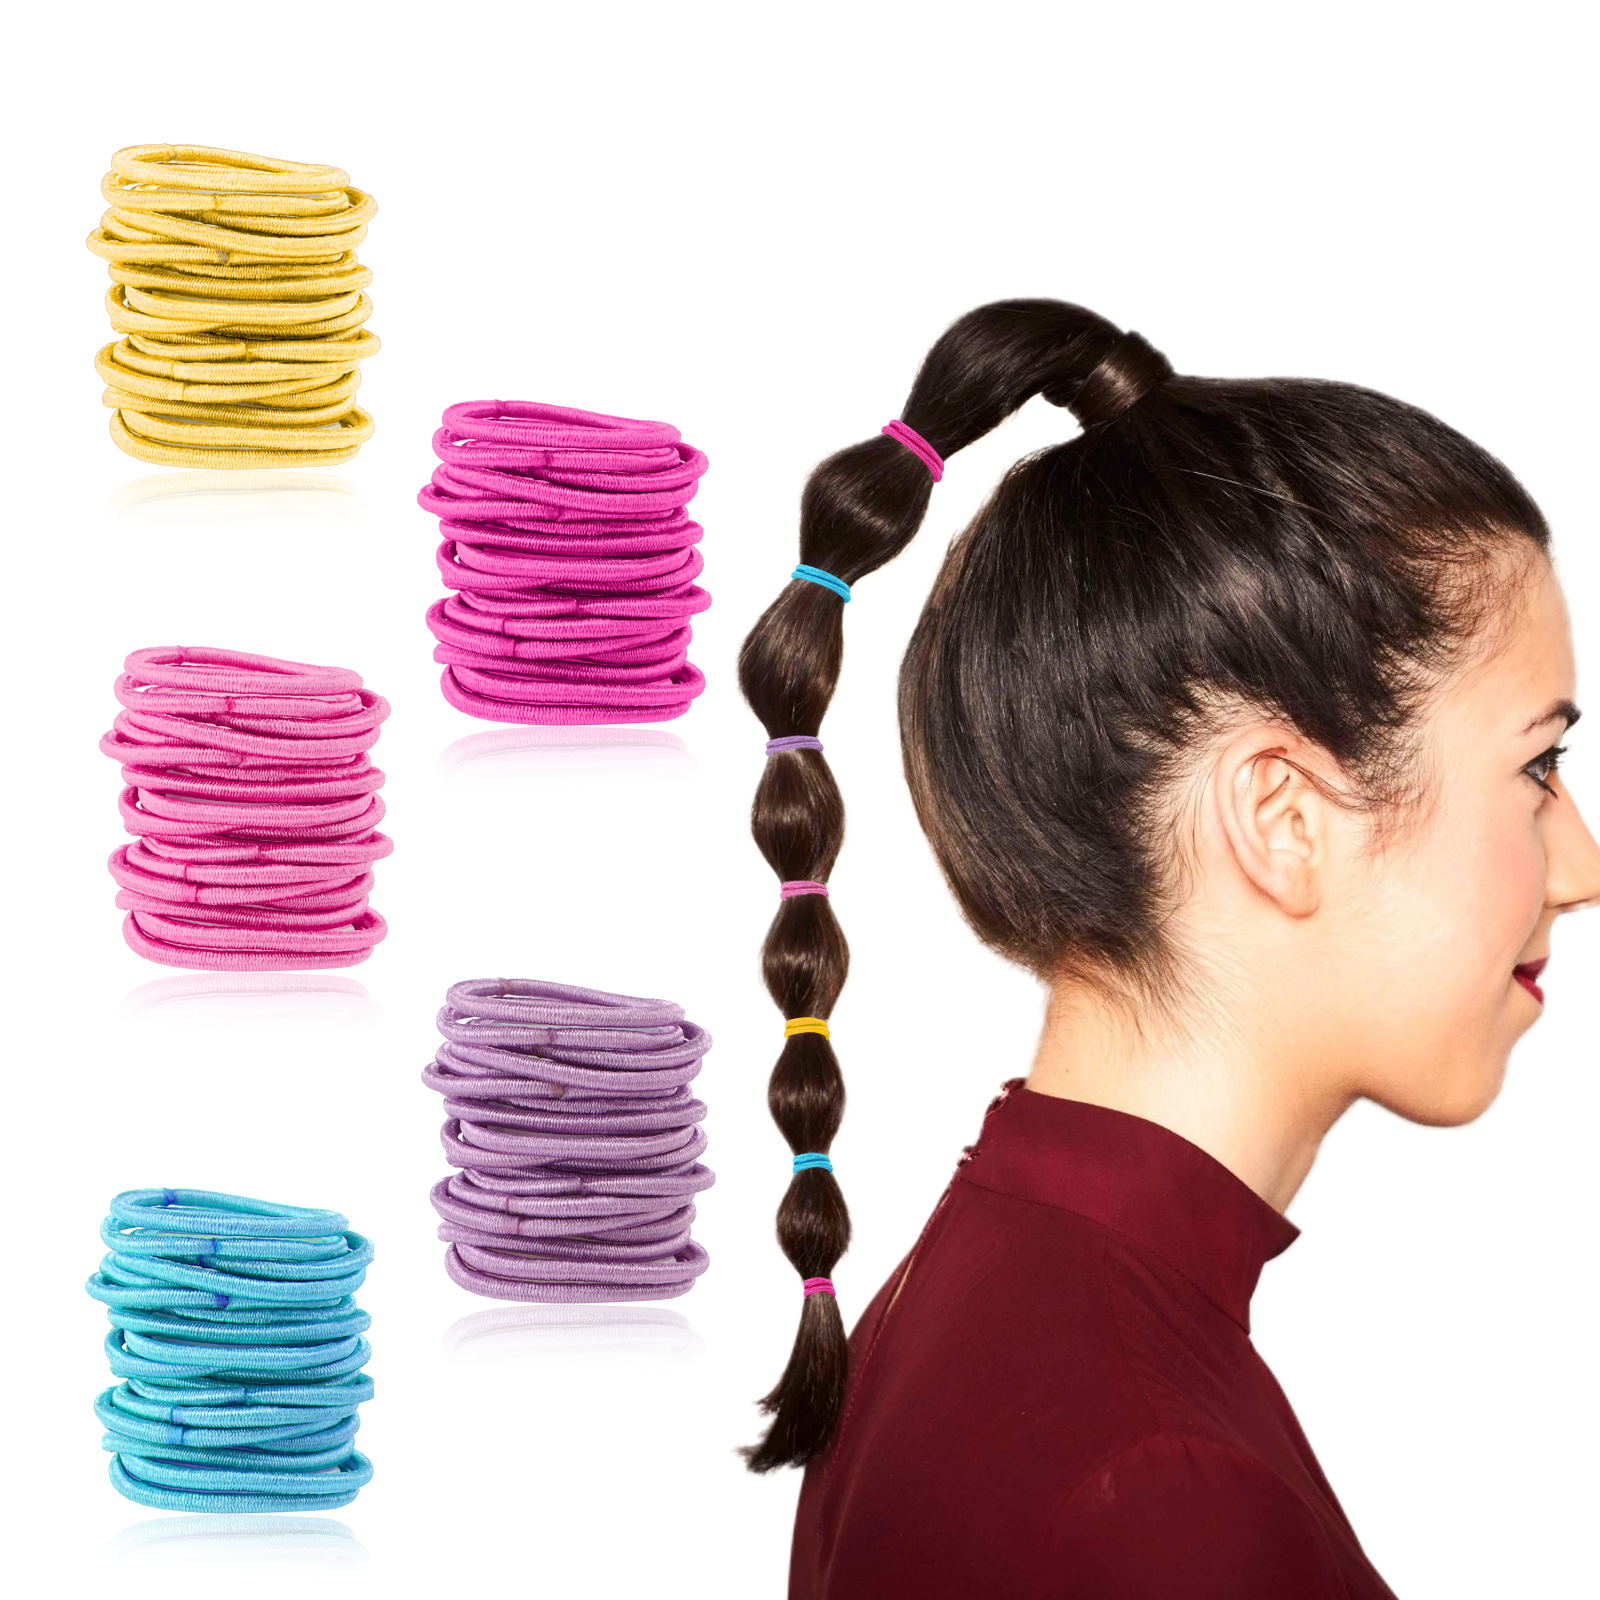 TSV 100pcs Girls Rubber Hair Ties, Colorful Small Seamless Hairbands, Elastic Ponytail Holders - image 5 of 8